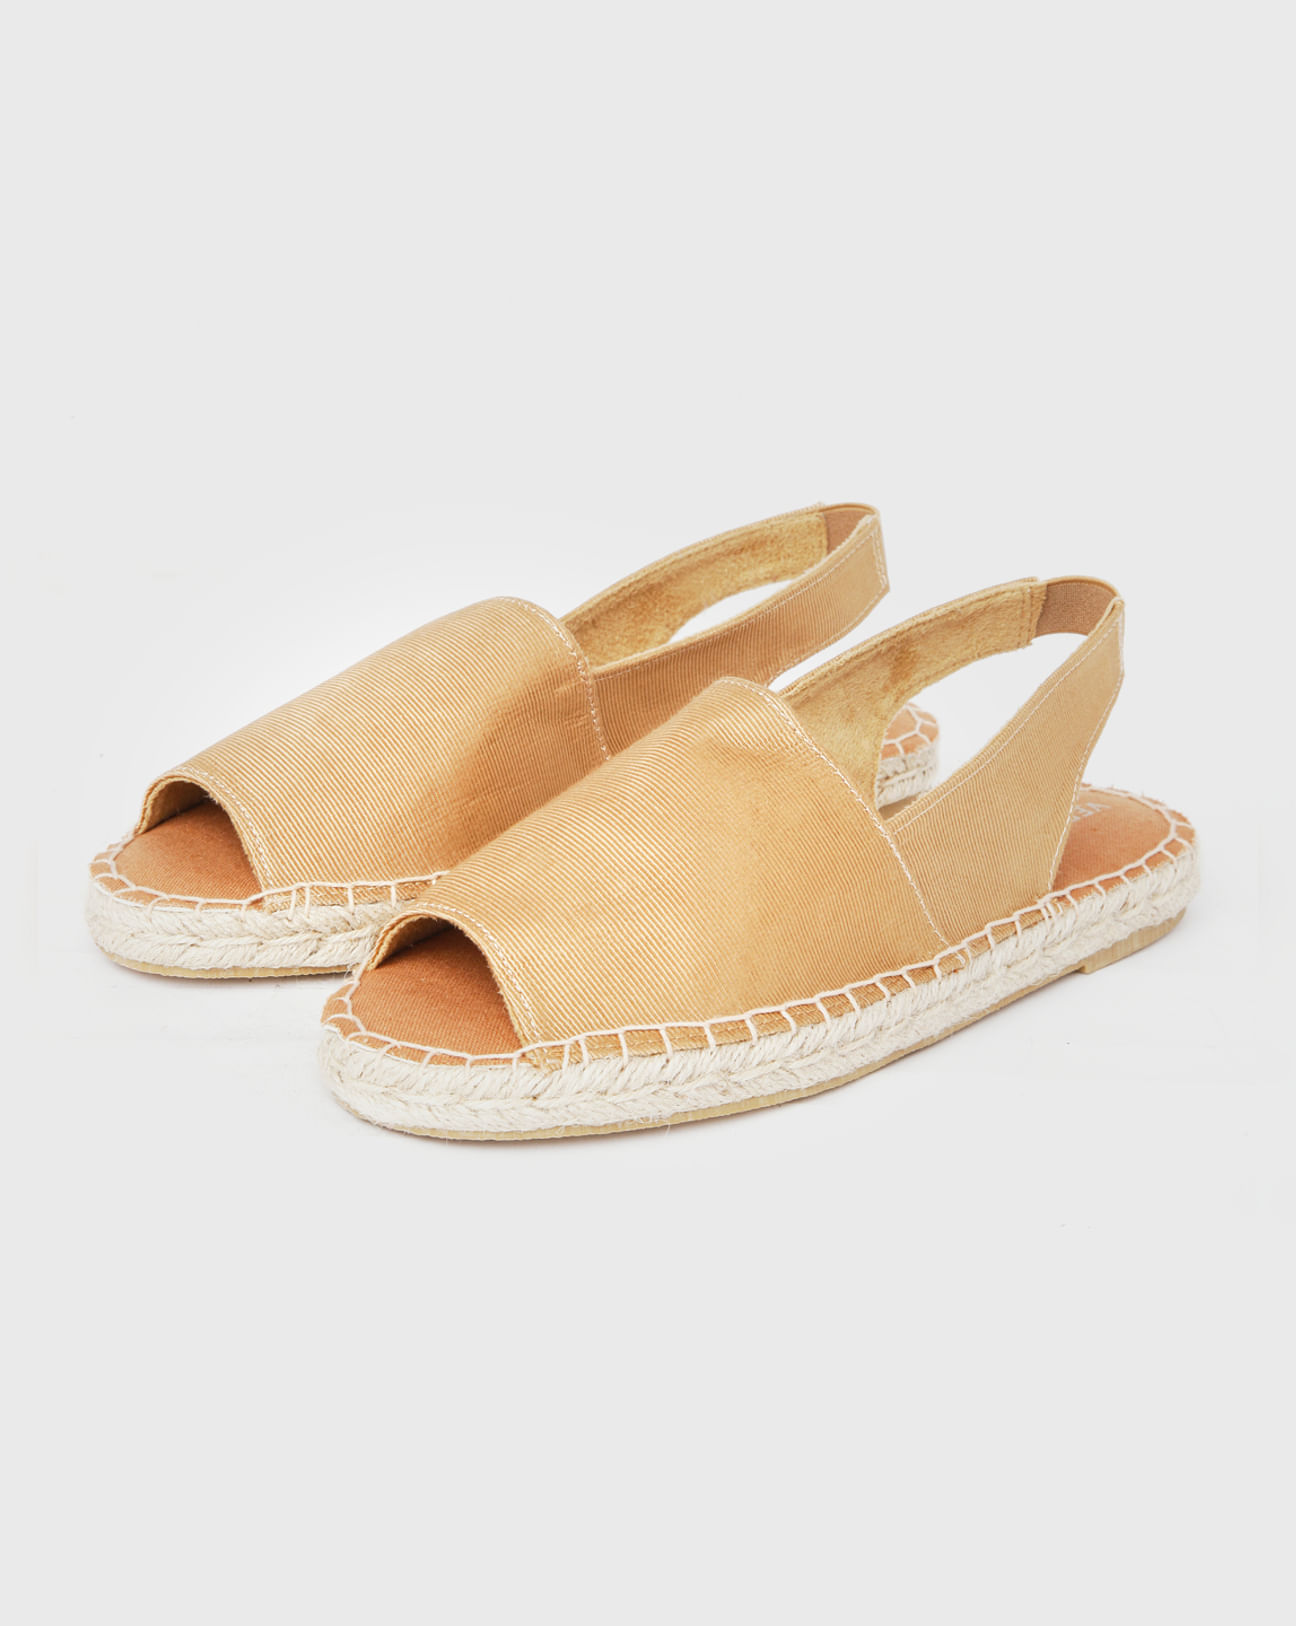 Sandals and Espadrilles Collection for Women